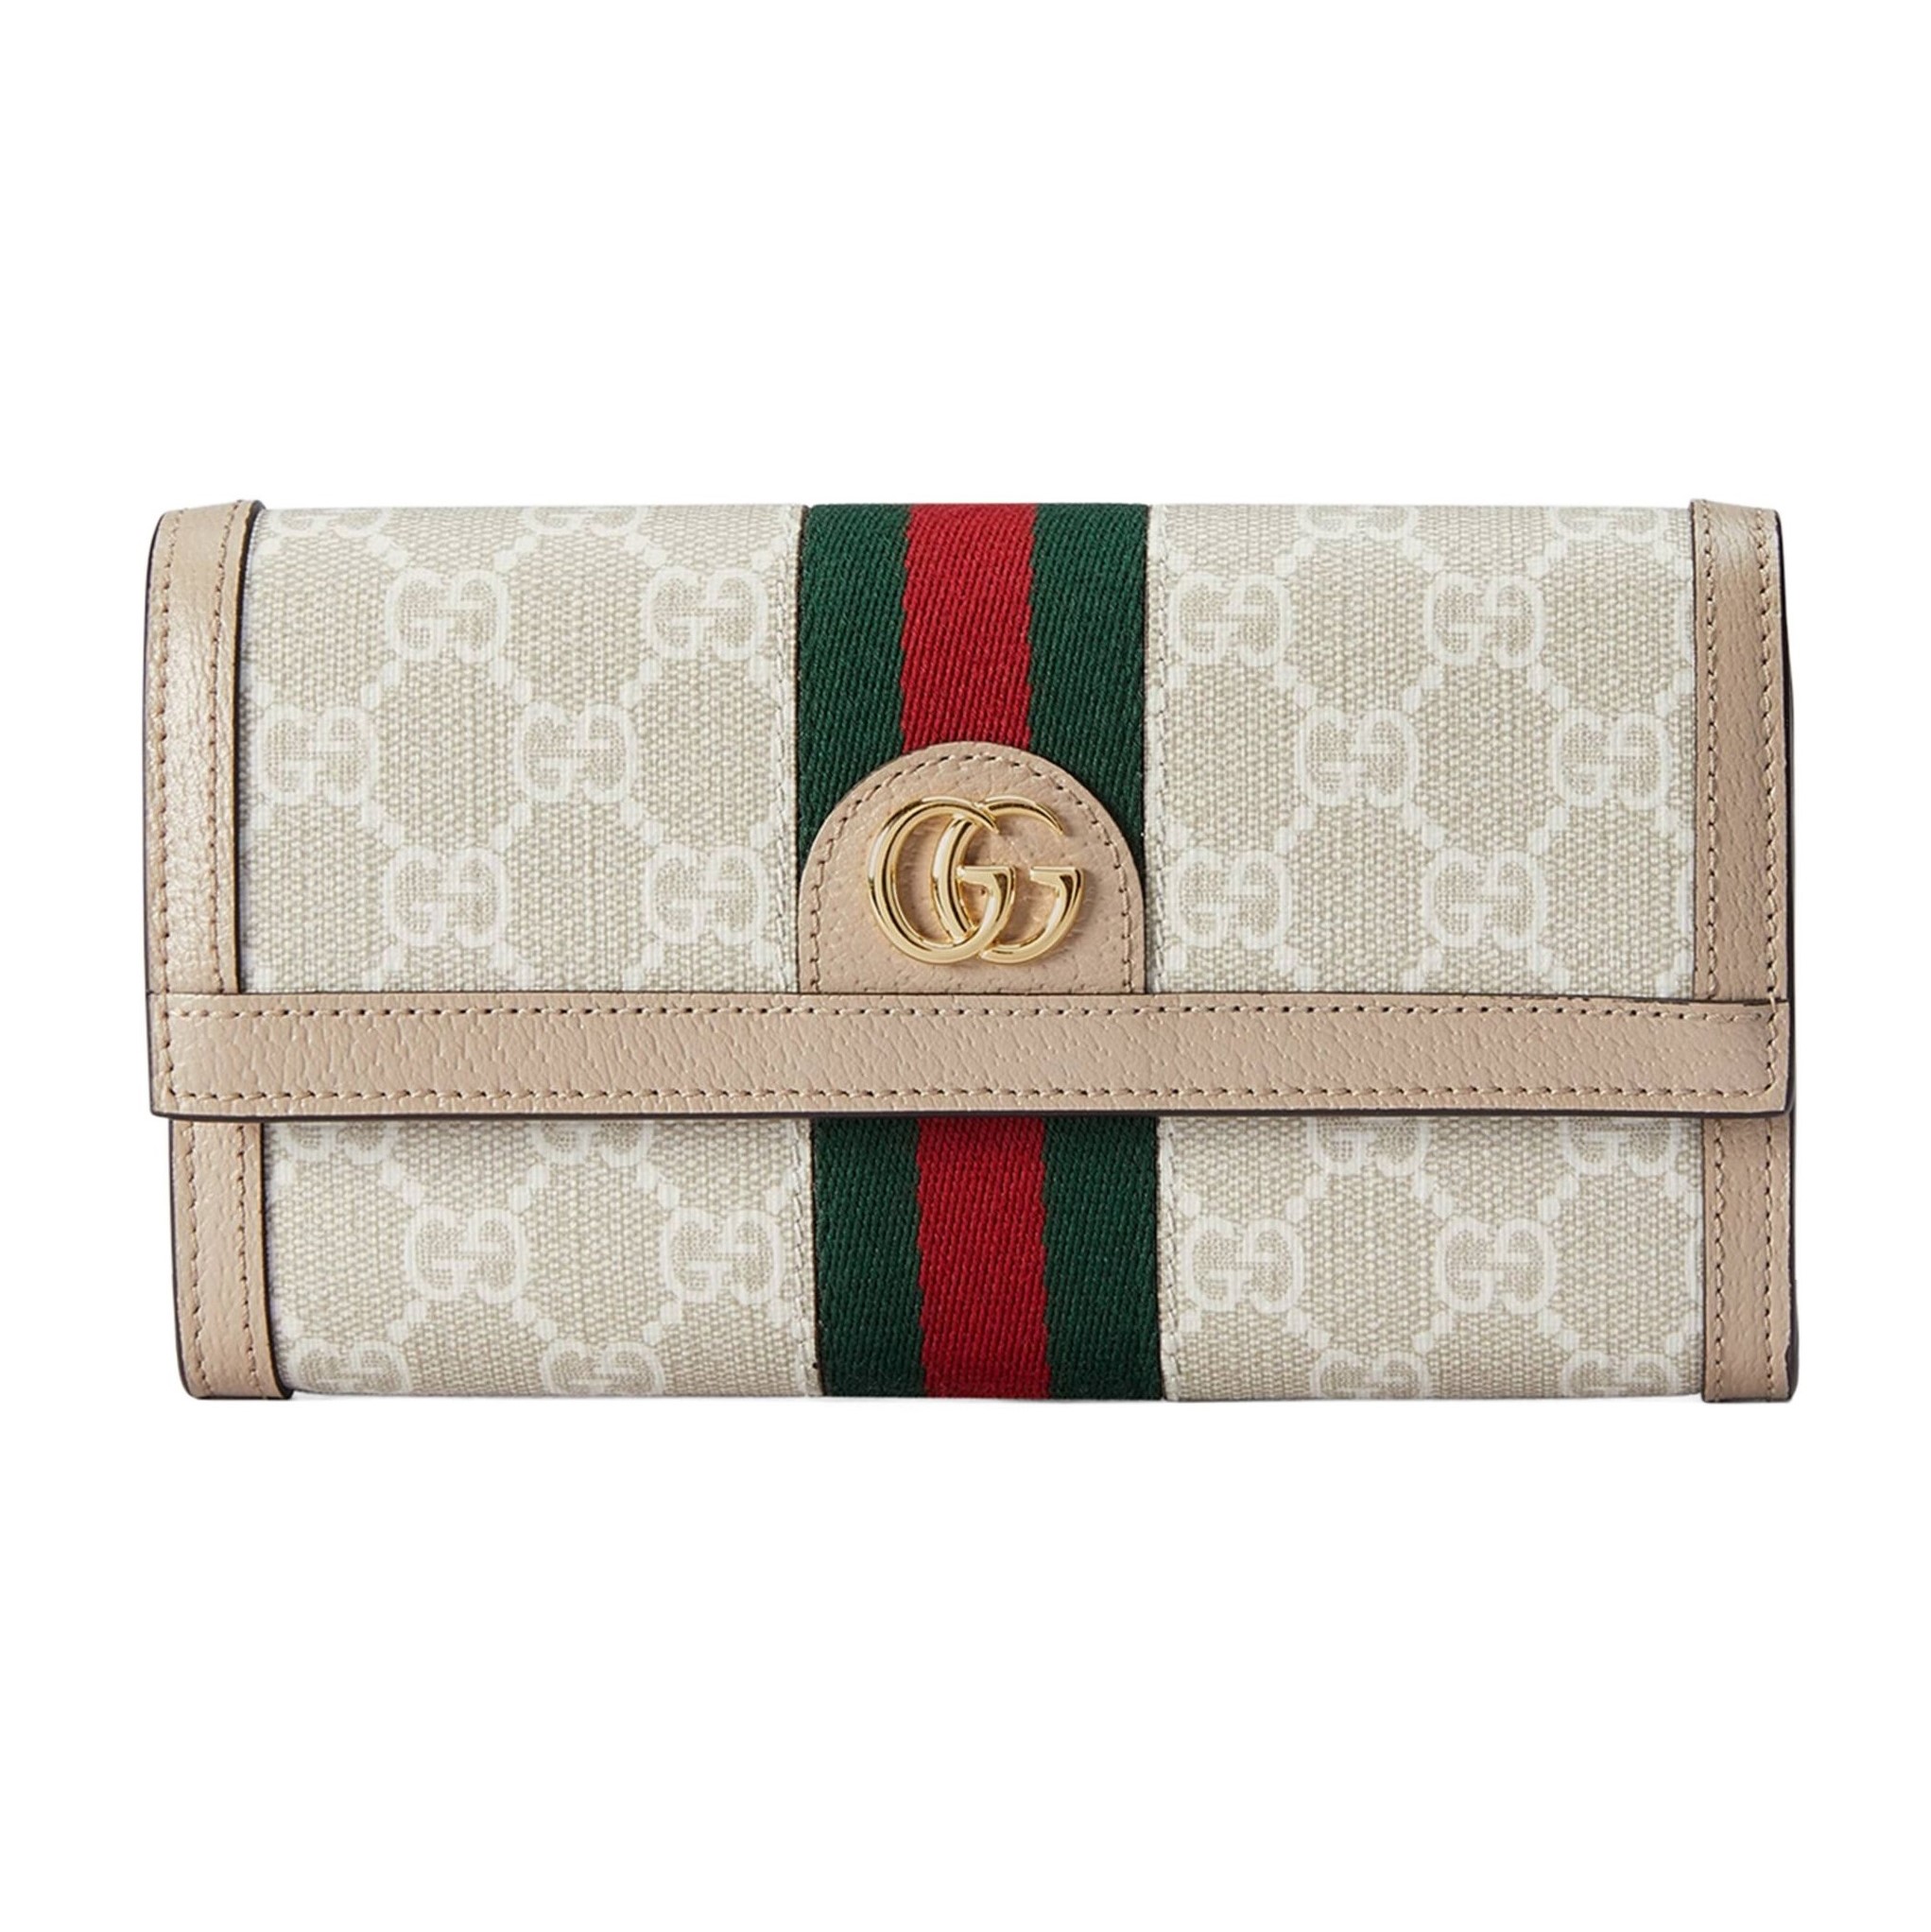 VÍ NỮ DÀI NẤP GẬP GUCCI OPHIDIA GG CONTINENTAL WALLET WITH BEIGE AND WHITE GG SUPREME CANVAS 3